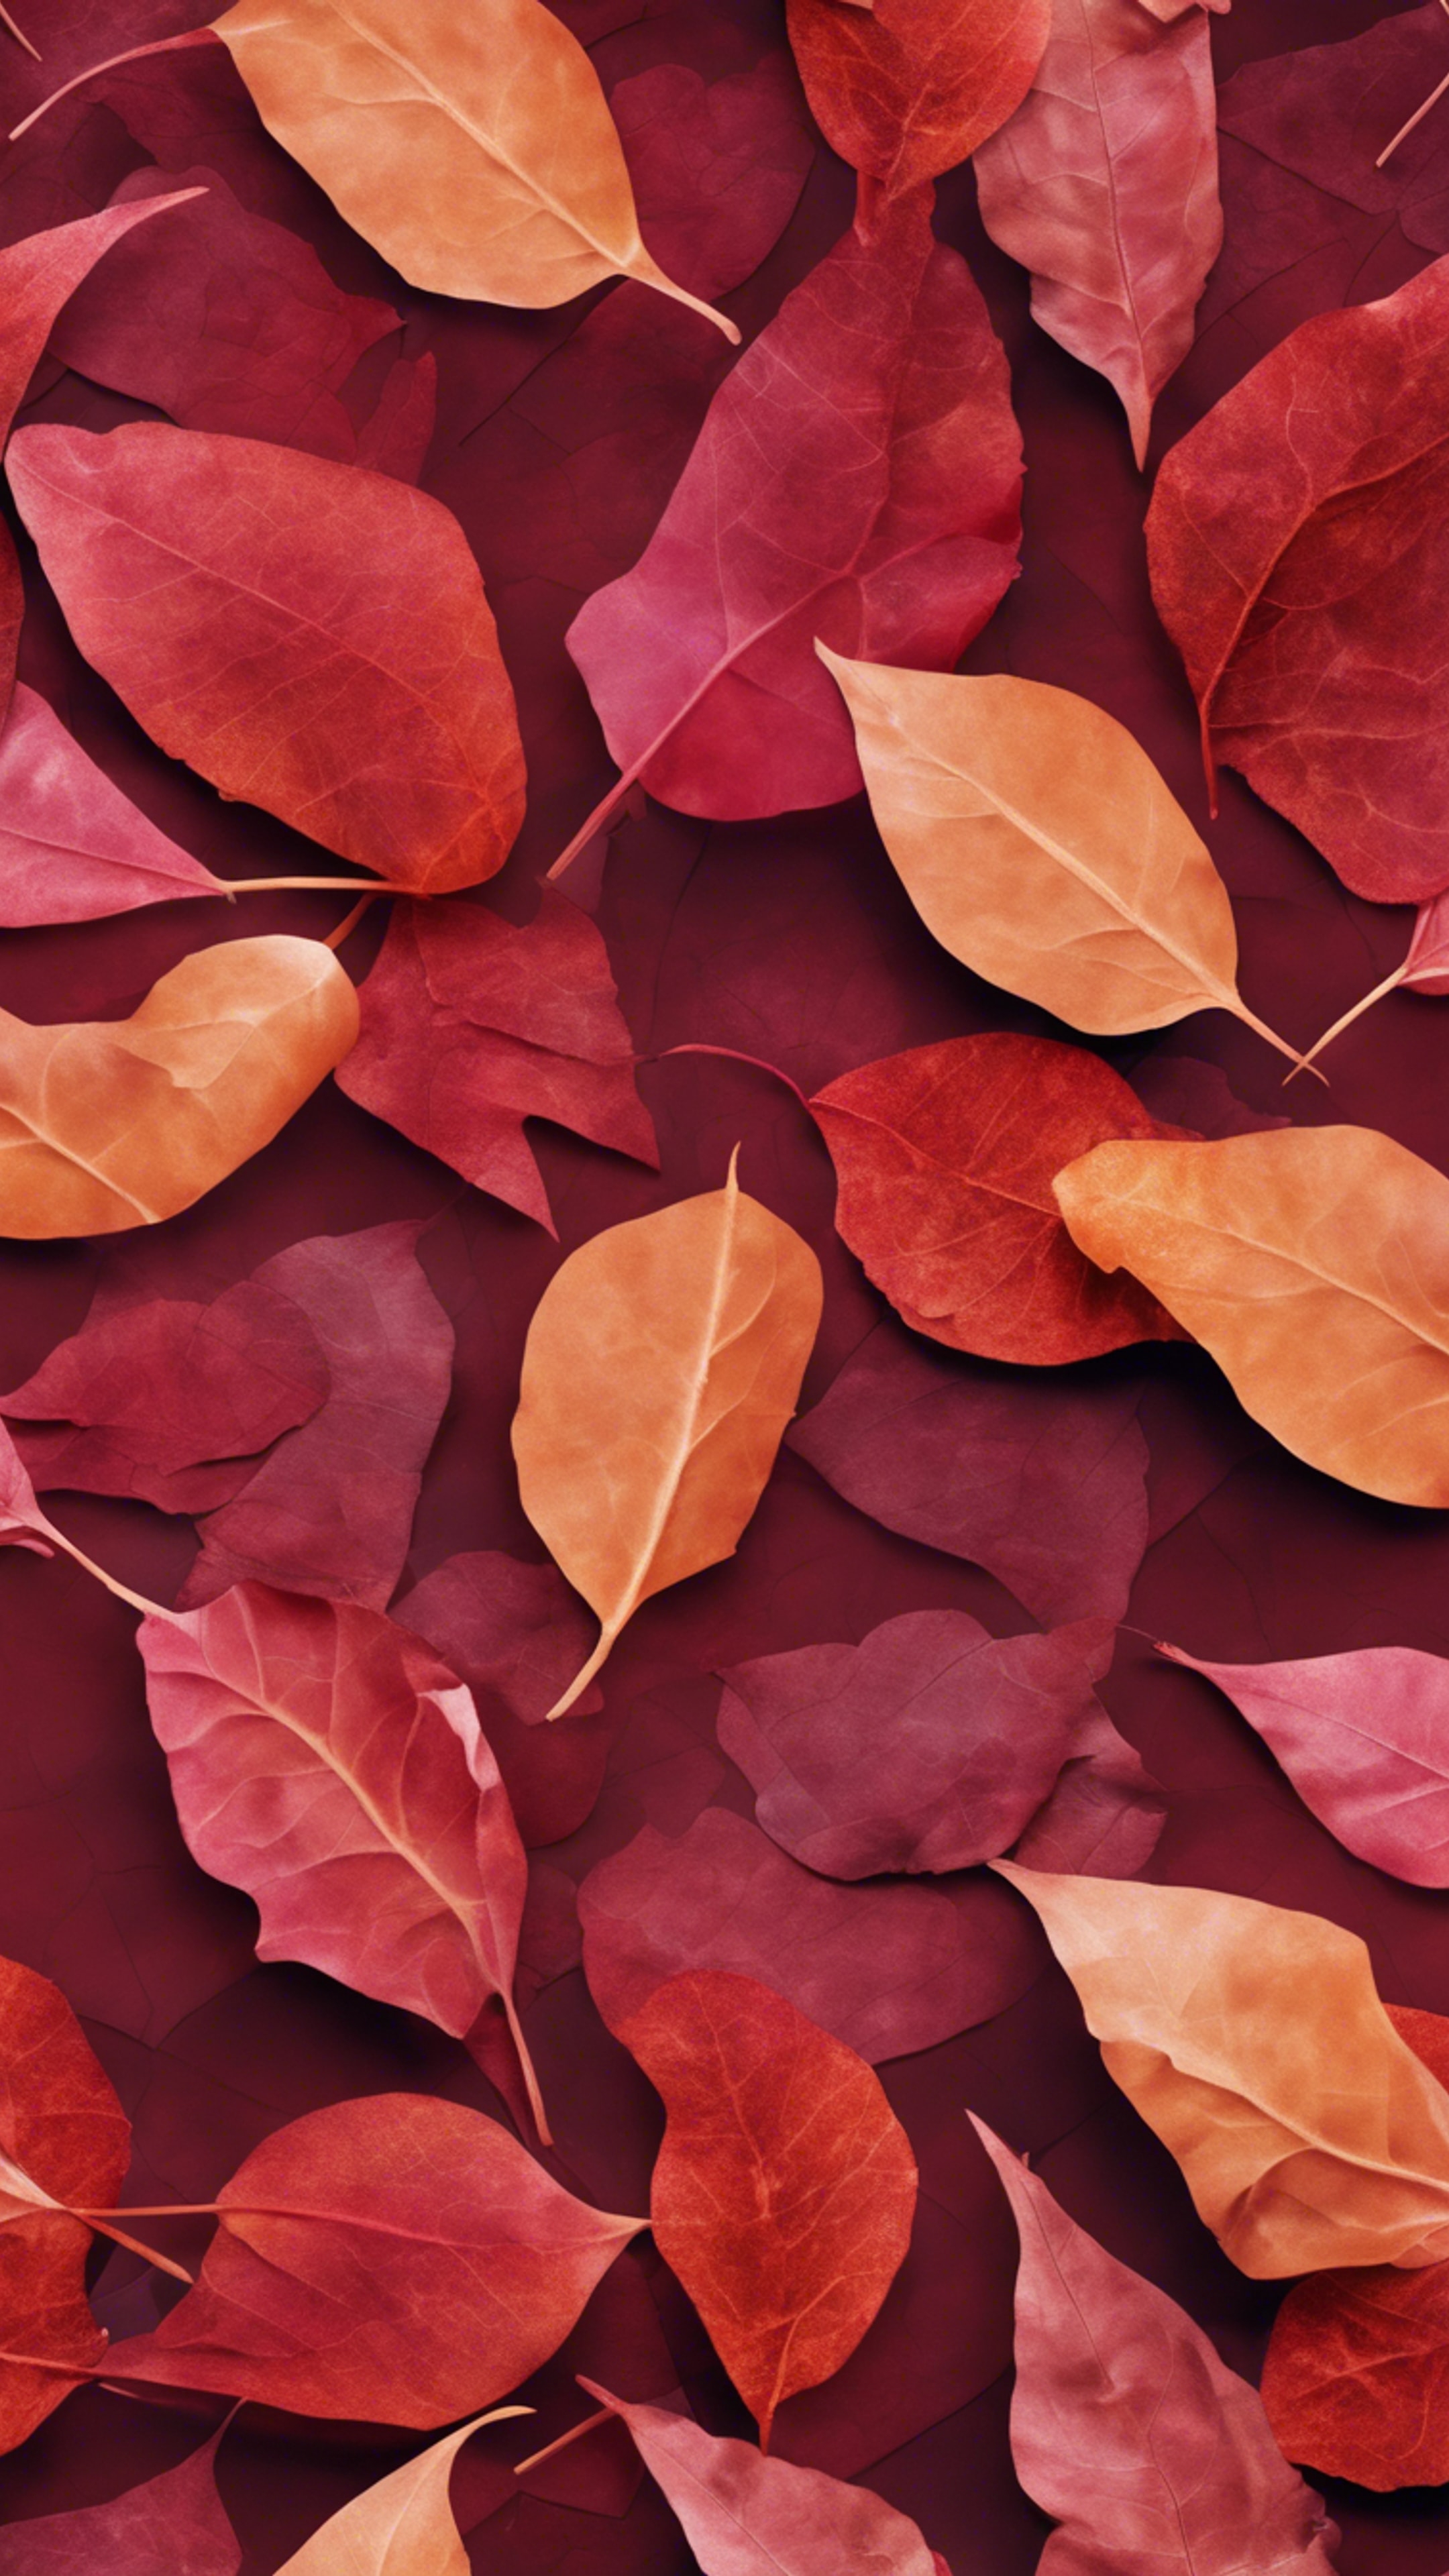 An abstract, tessellating pattern of fiery ruby and russet shapes, reminiscent of falling leaves in autumn. Tapet[1bca3c6cf9b9400393d6]